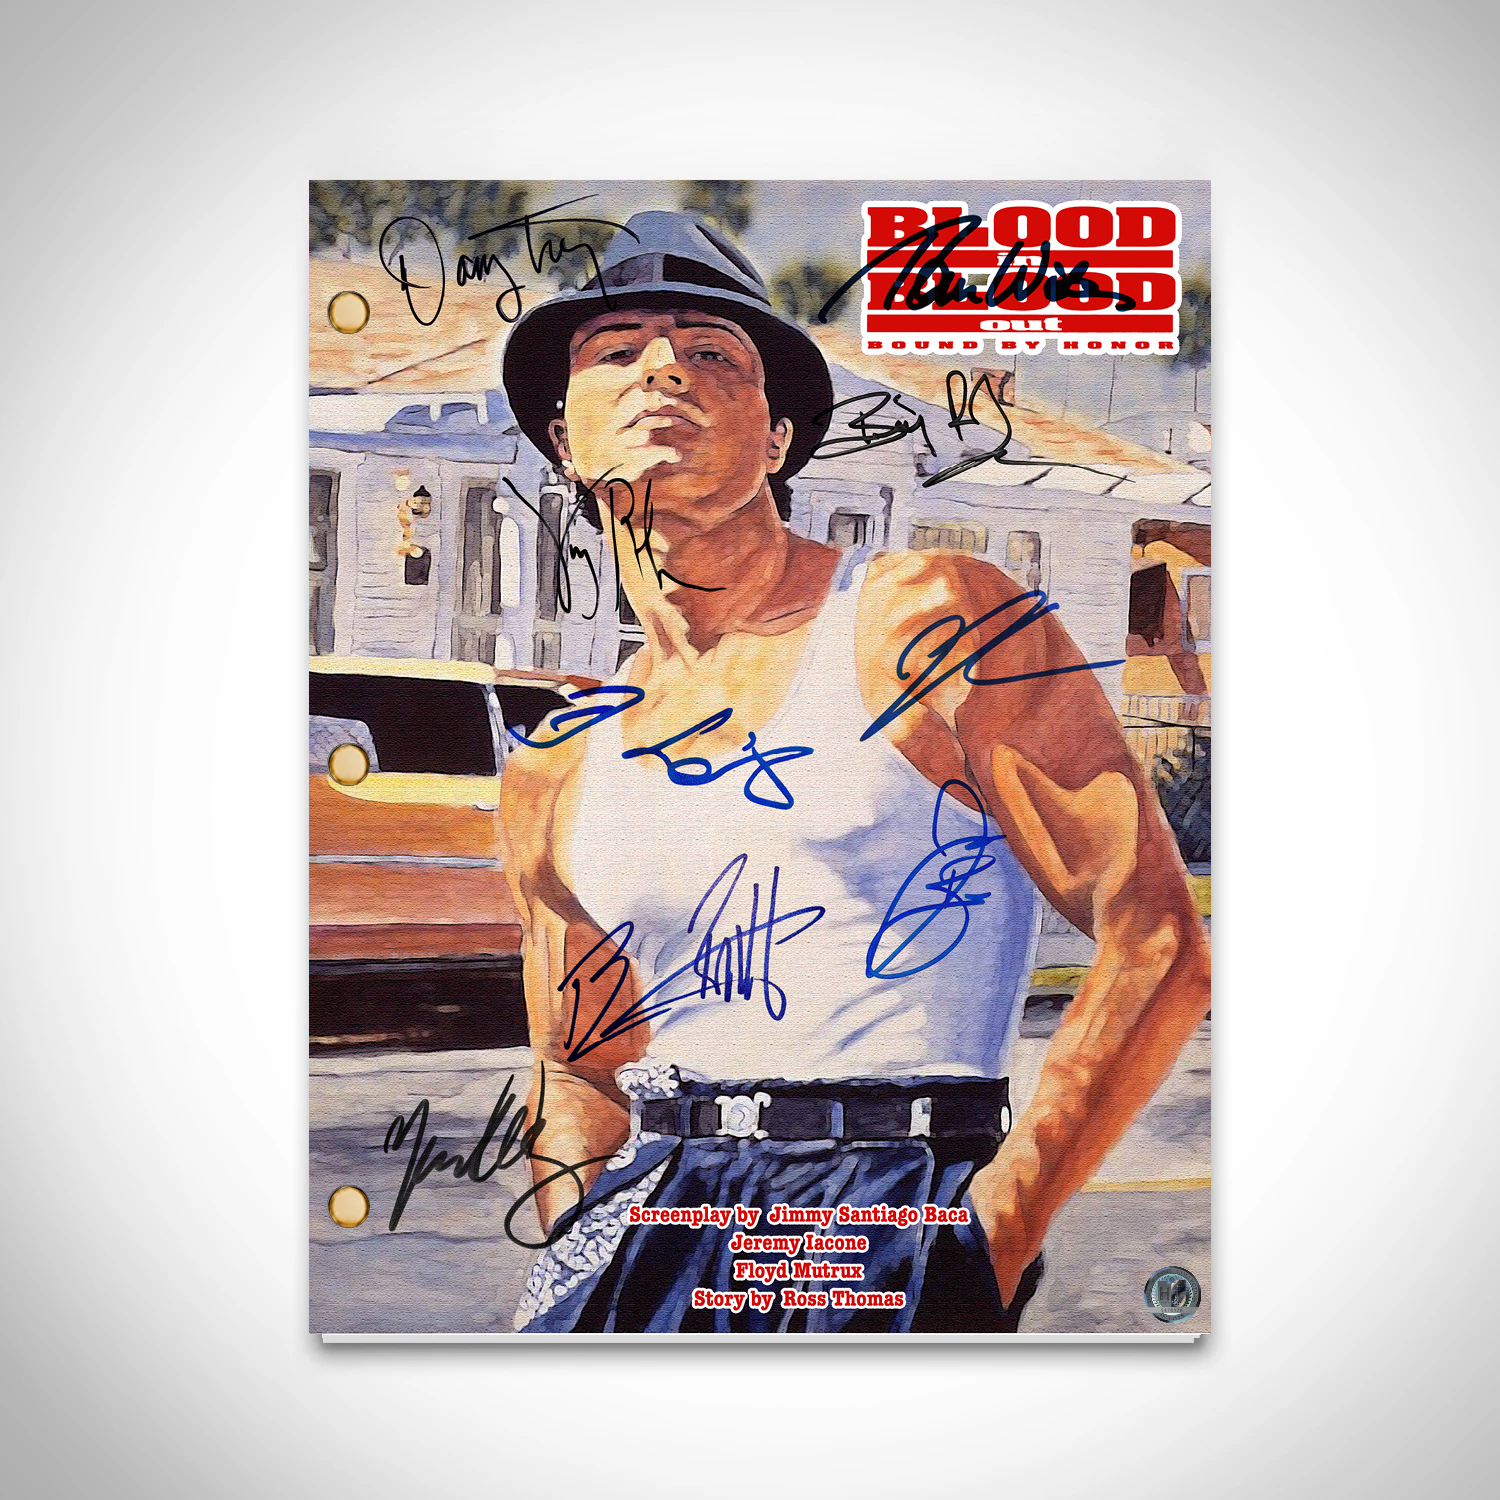 Blood In Blood Out (1993) Transcript Limited Signature Edition